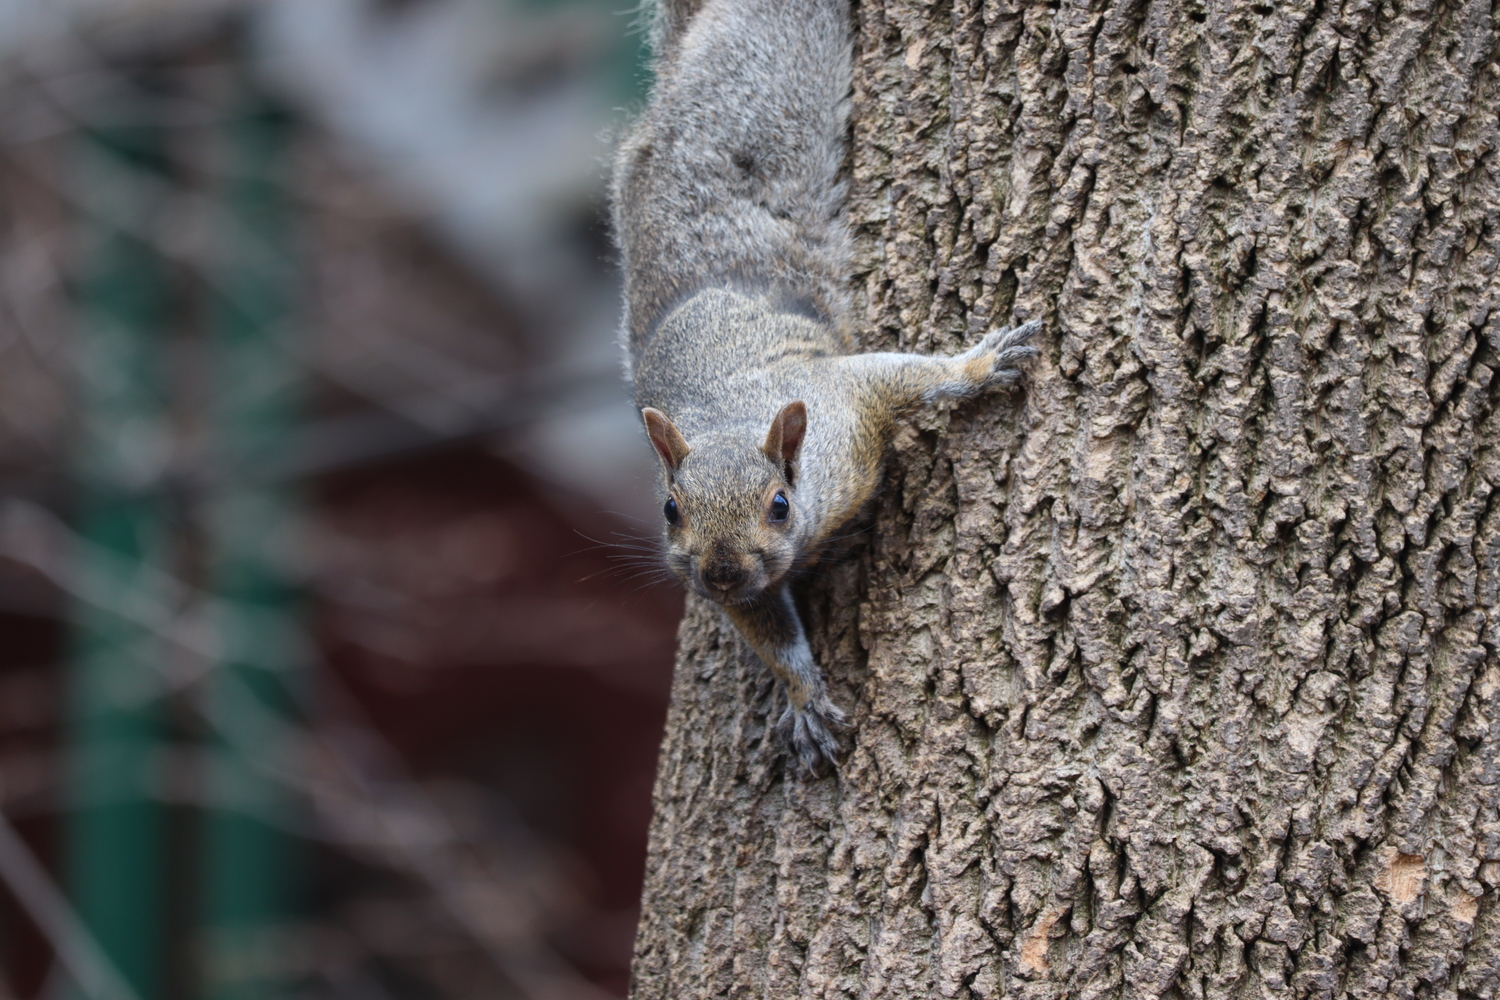 a squirrel on the trunk of a tree,
its body facing down
and its head lifted towards the camera.
ones of its paws is stretched out to the side.